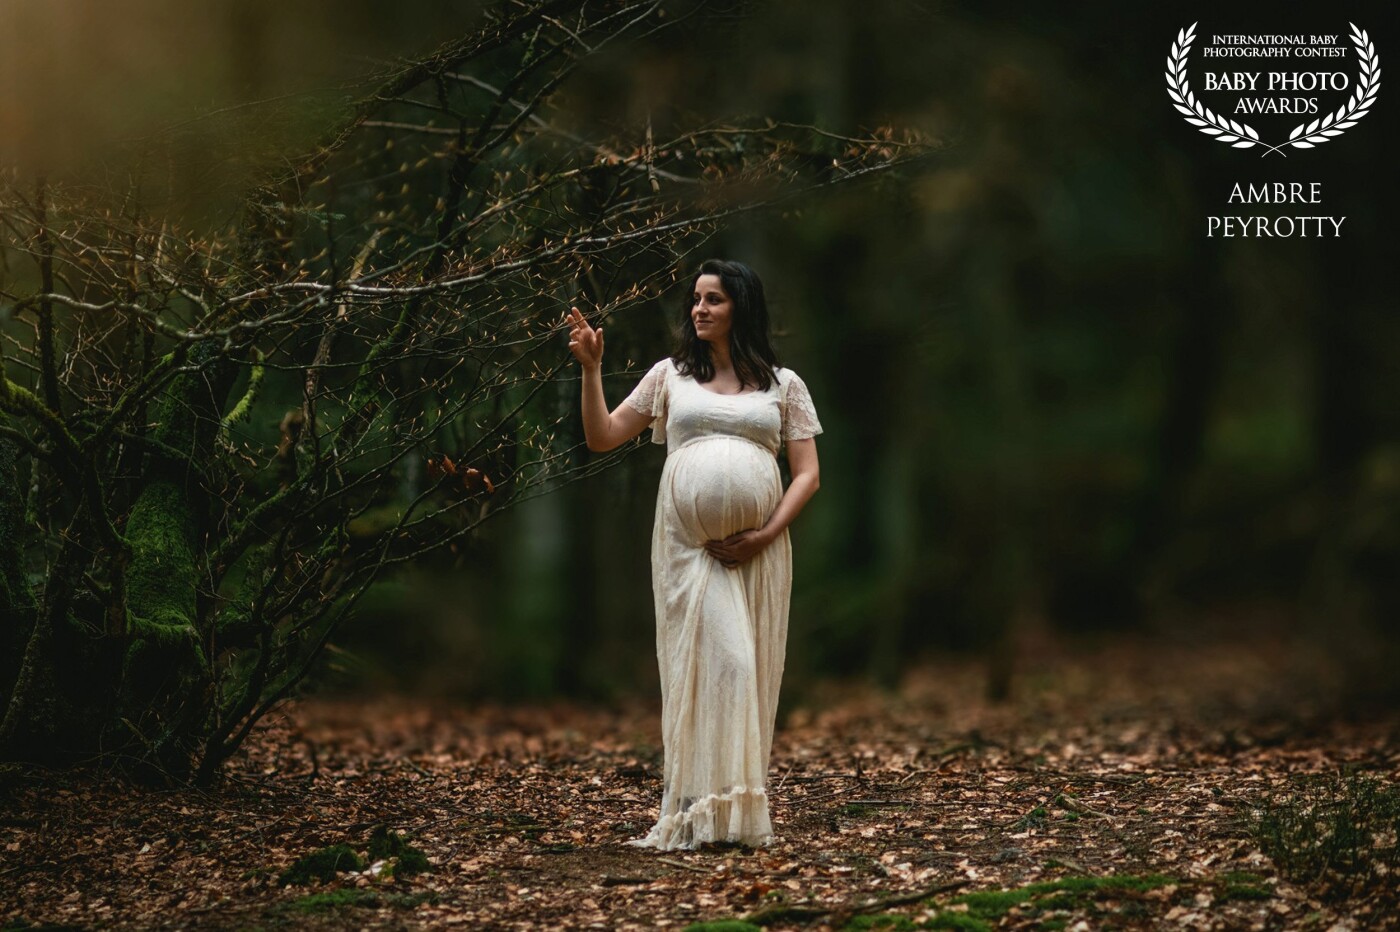 Beautiful Typhanie wanted something very special captured for her maternity pictures, and we managed to do just that while walking through an amazing forest in Central France.